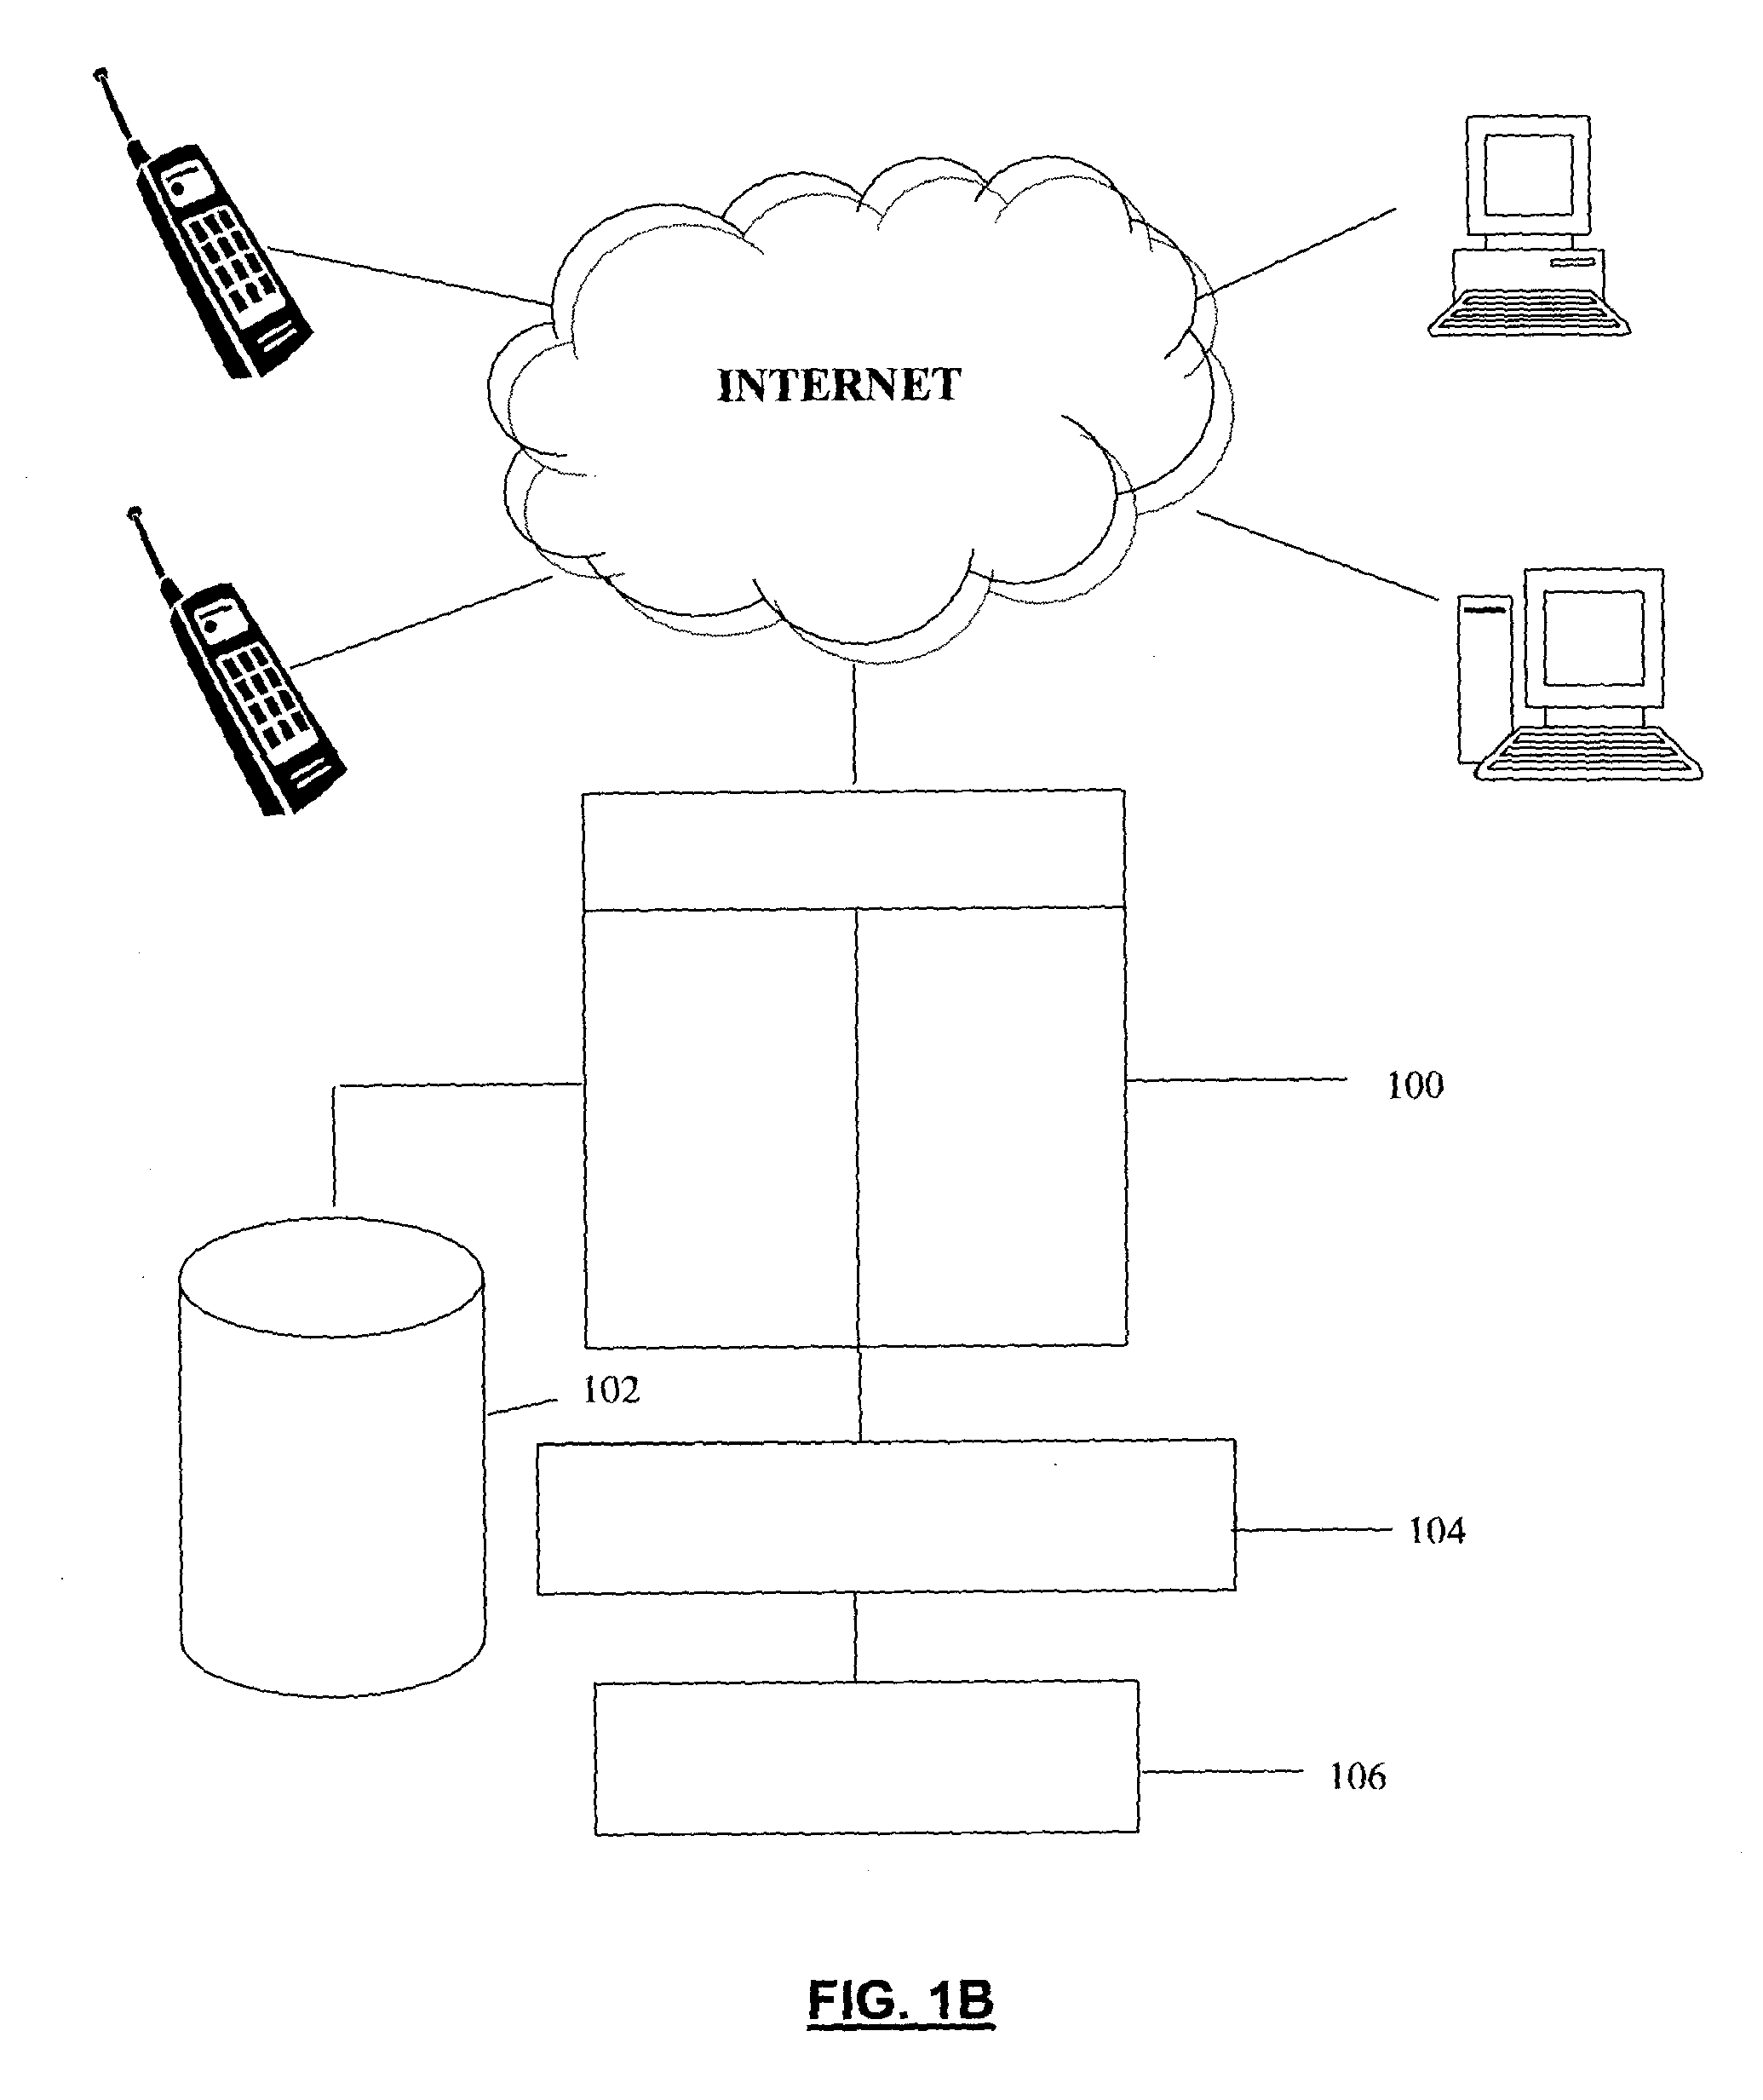 Method, System and Computer Program Product for Automatic and Semi-Automatic Modification of Digital Images of Faces